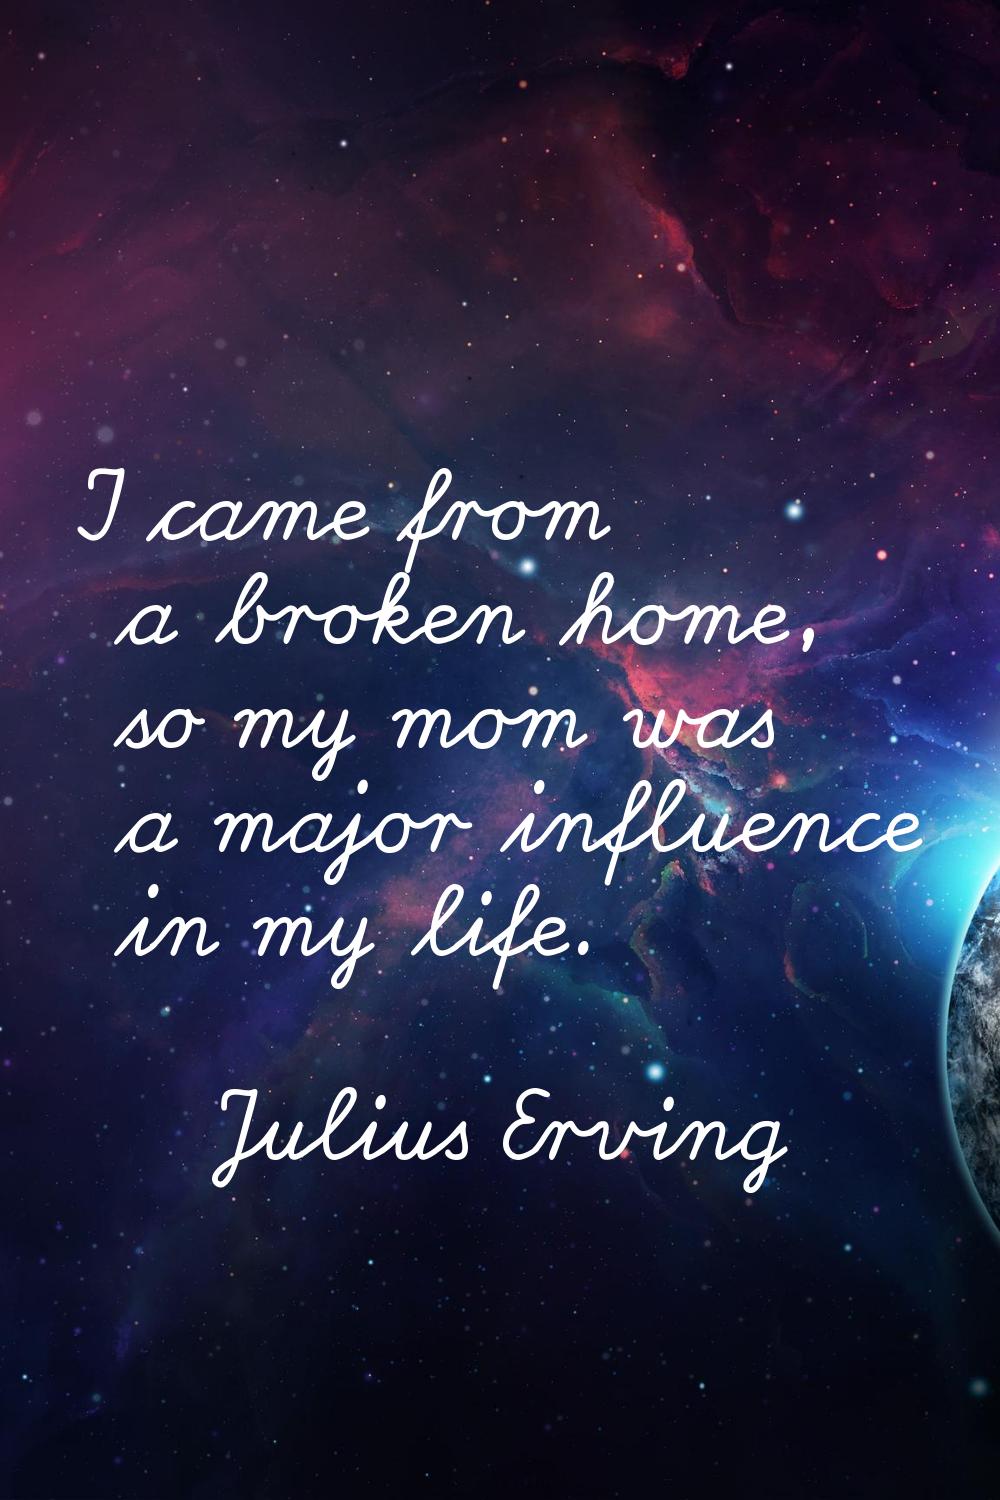 I came from a broken home, so my mom was a major influence in my life.